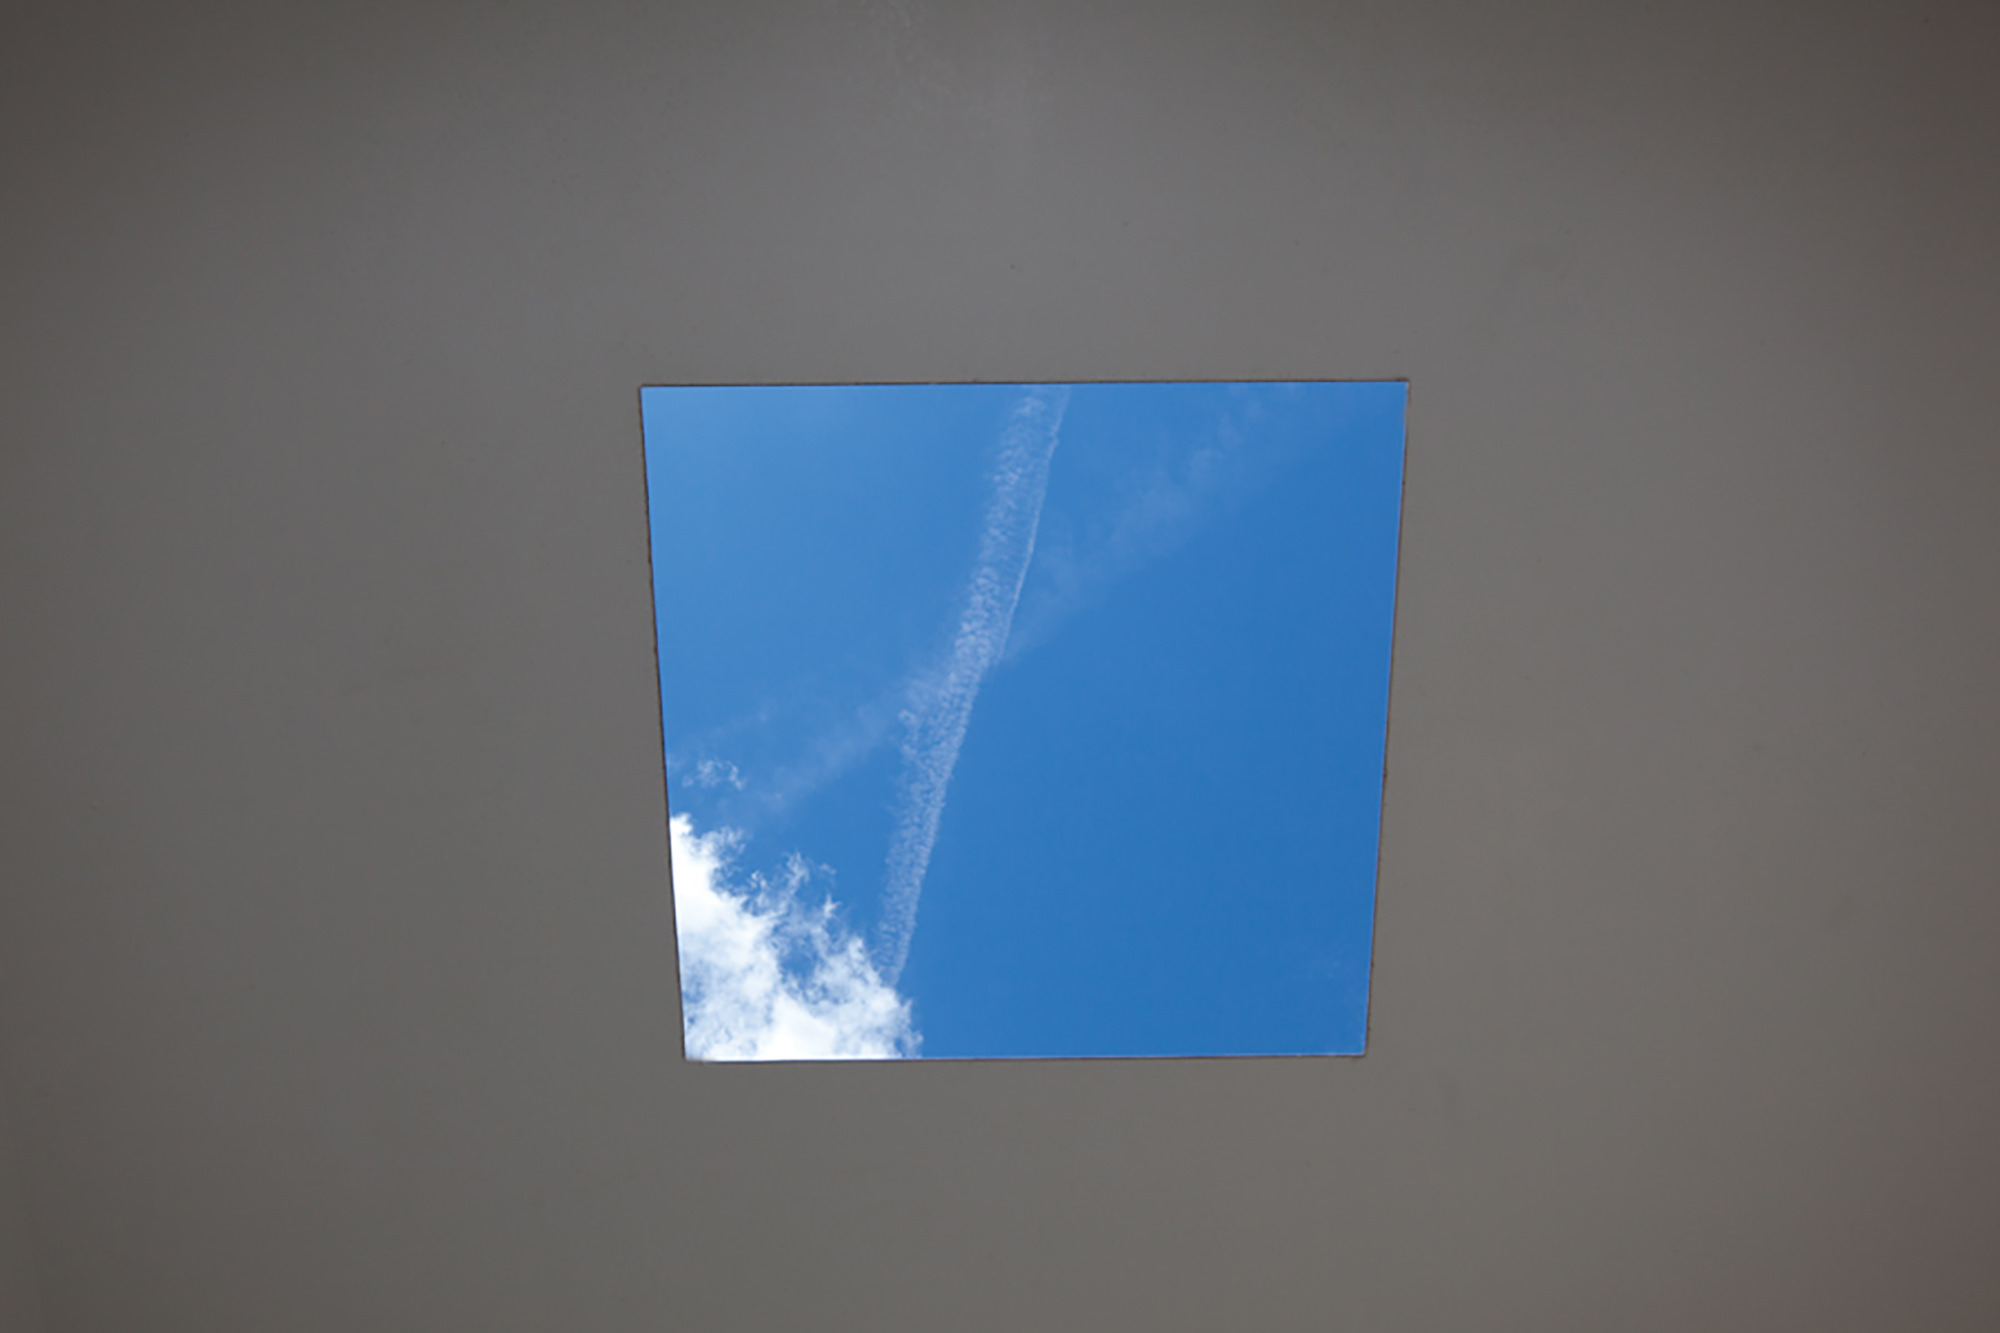 The view through a square hole in the roof of Skyspace, showing a blue sky with clouds and airplane trails